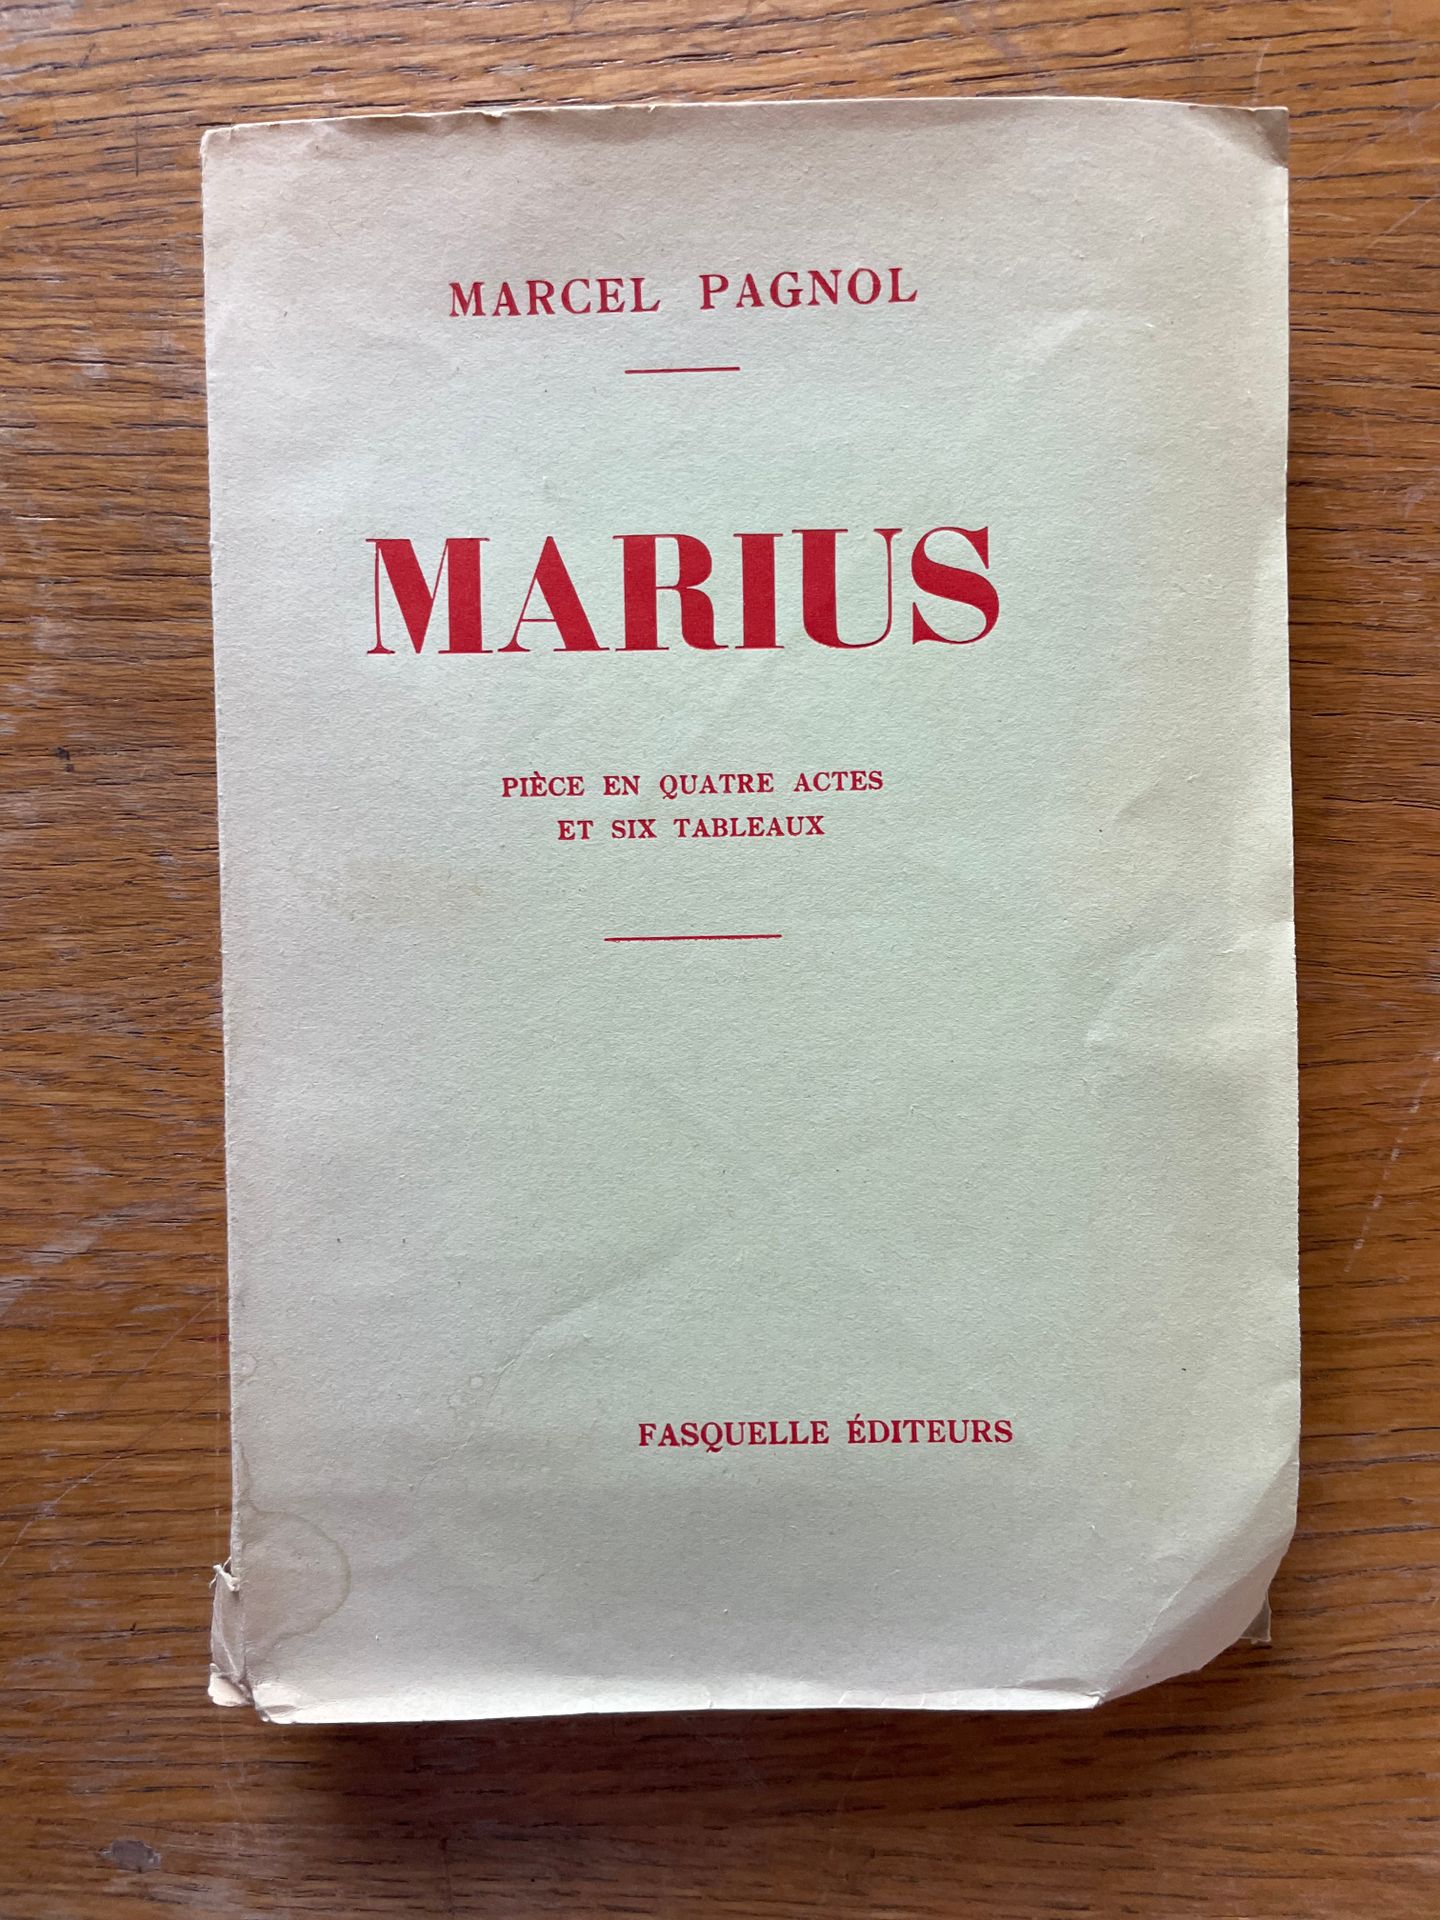 Marcel PAGNOL - Marius Paris, Fasquelle, 1931
First edition
One of 100 copies on&hellip;